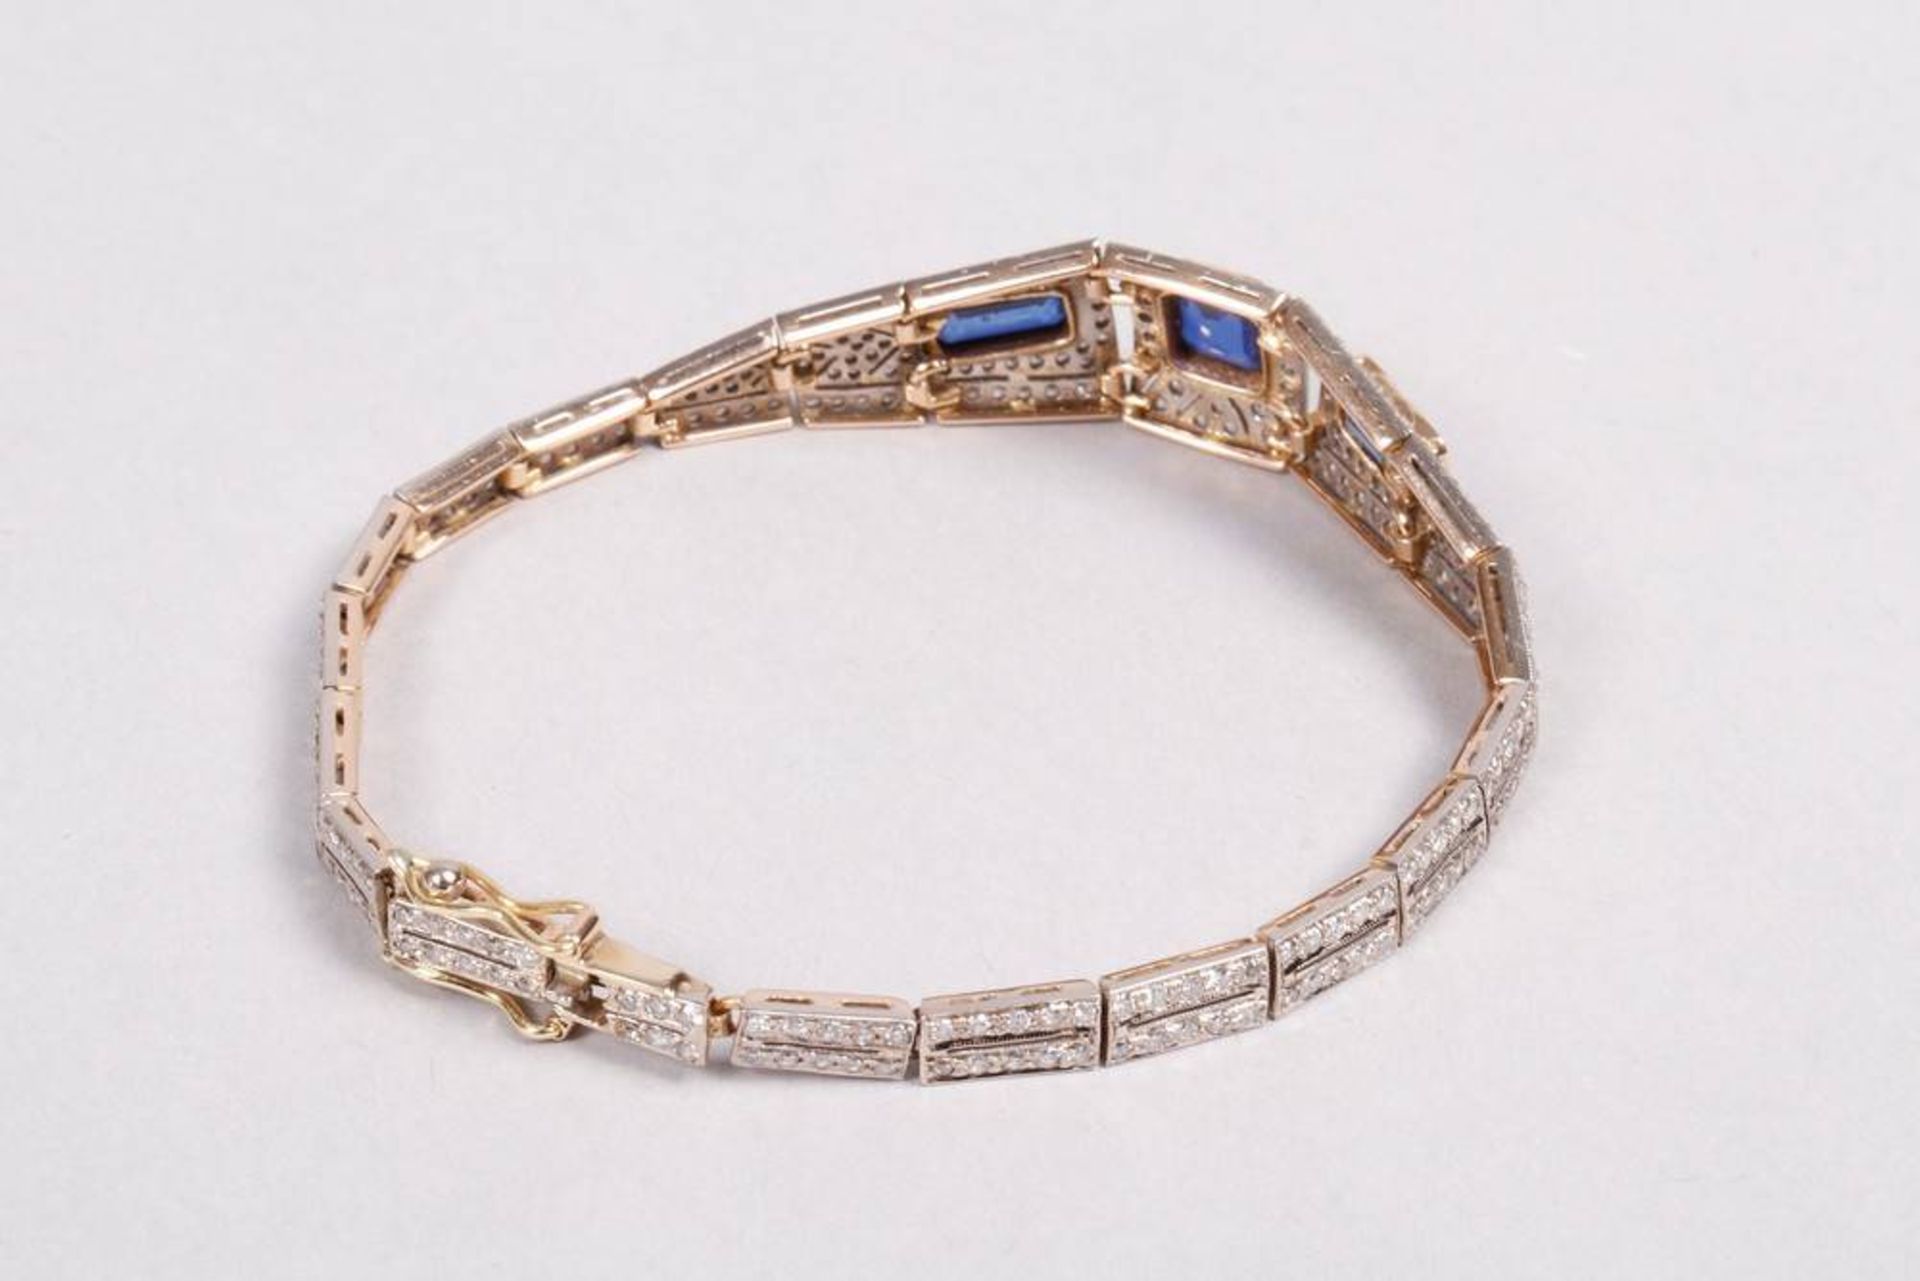 Art Deco bracelet with diamonds and sapphires, 750 gold - Image 2 of 4